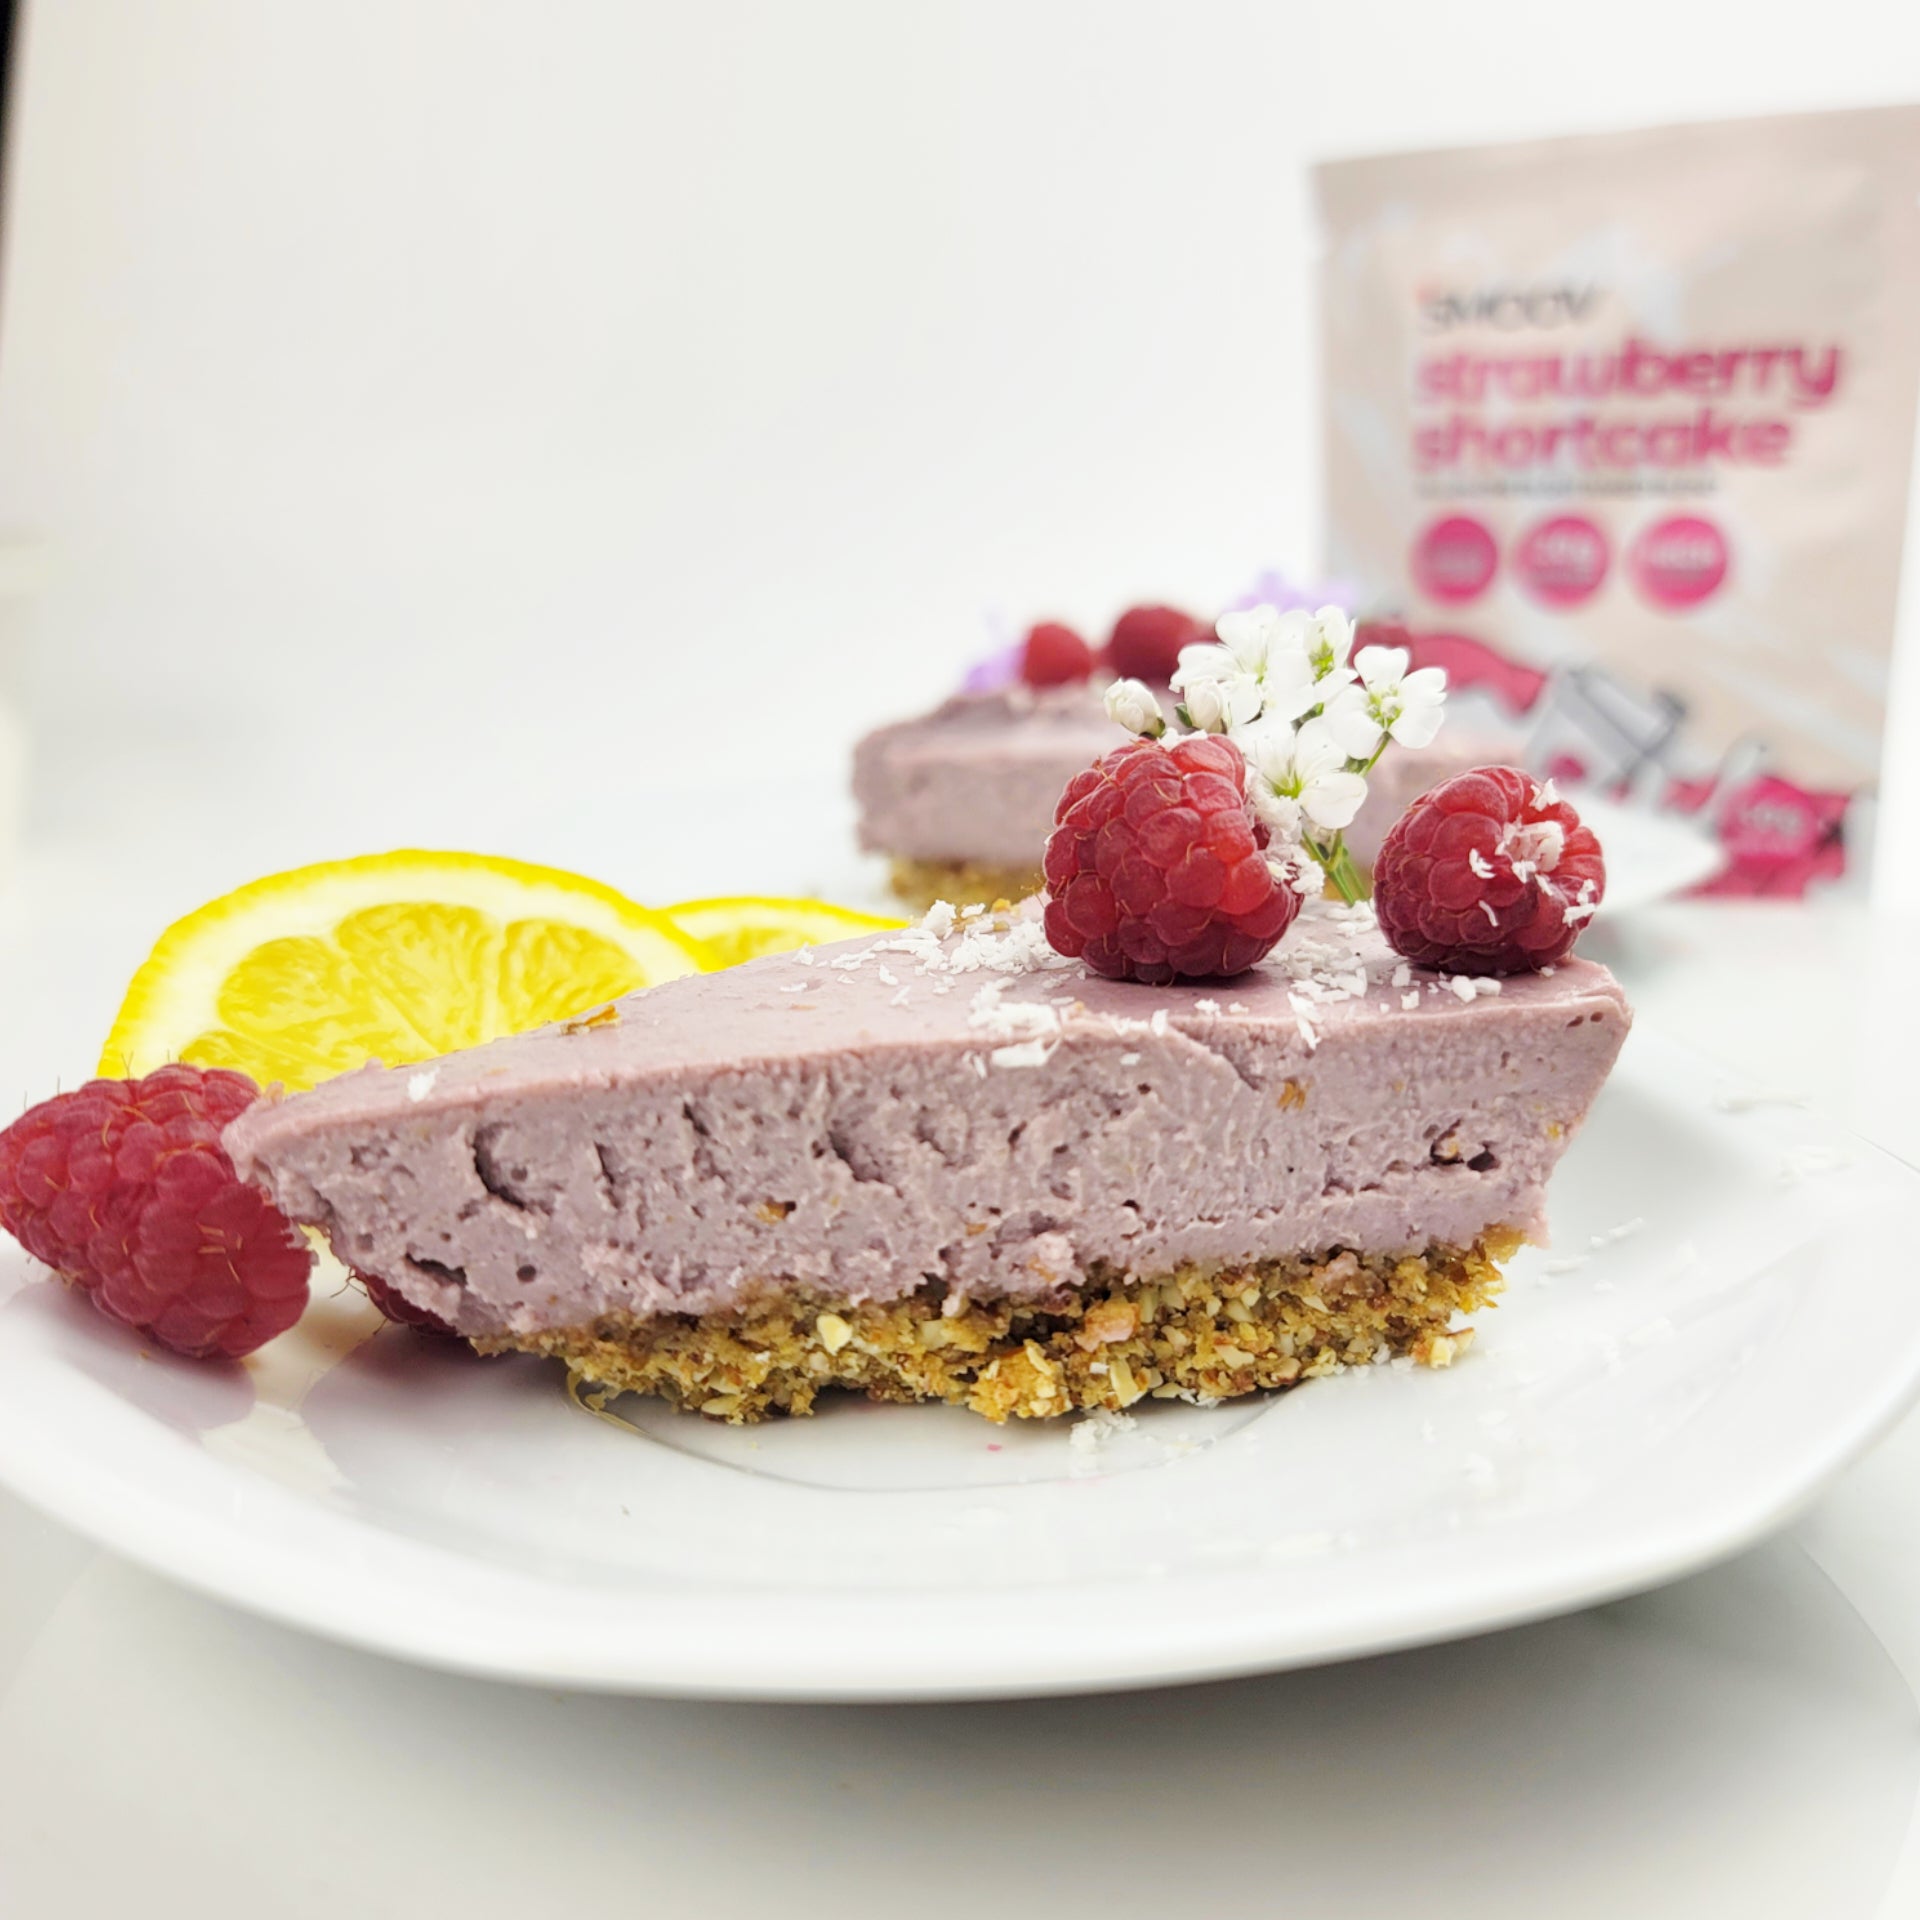 Lemon raspberry vegan cheesecake made using smoov strawberry shortcake all in one blend, healthy meal replacement shake